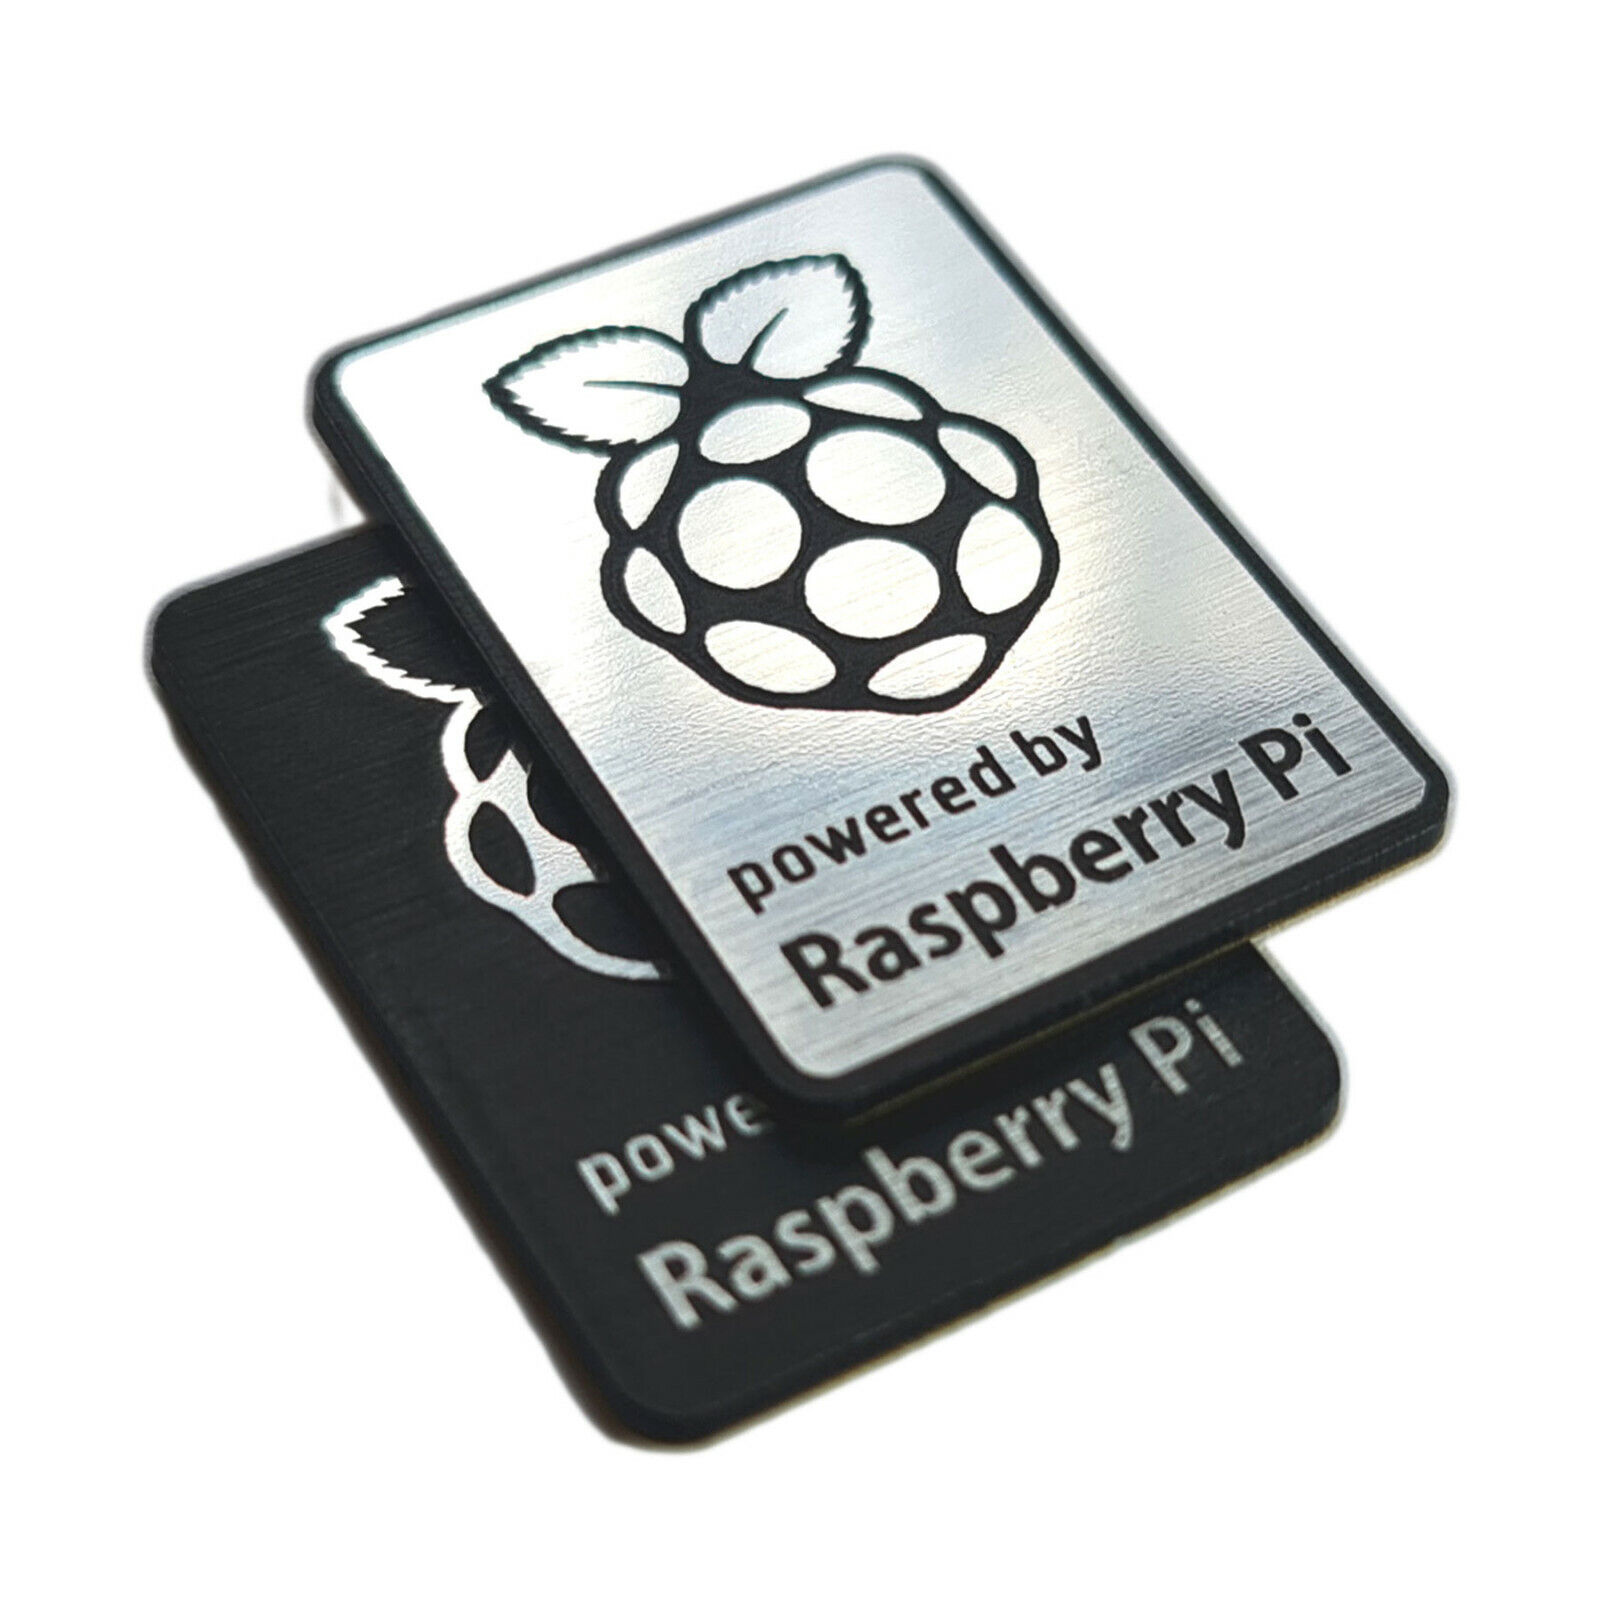 Raspberry Pi Sticker Case Badge - Chrome Reflective - 35 mm x 25 mm (Two pieces)